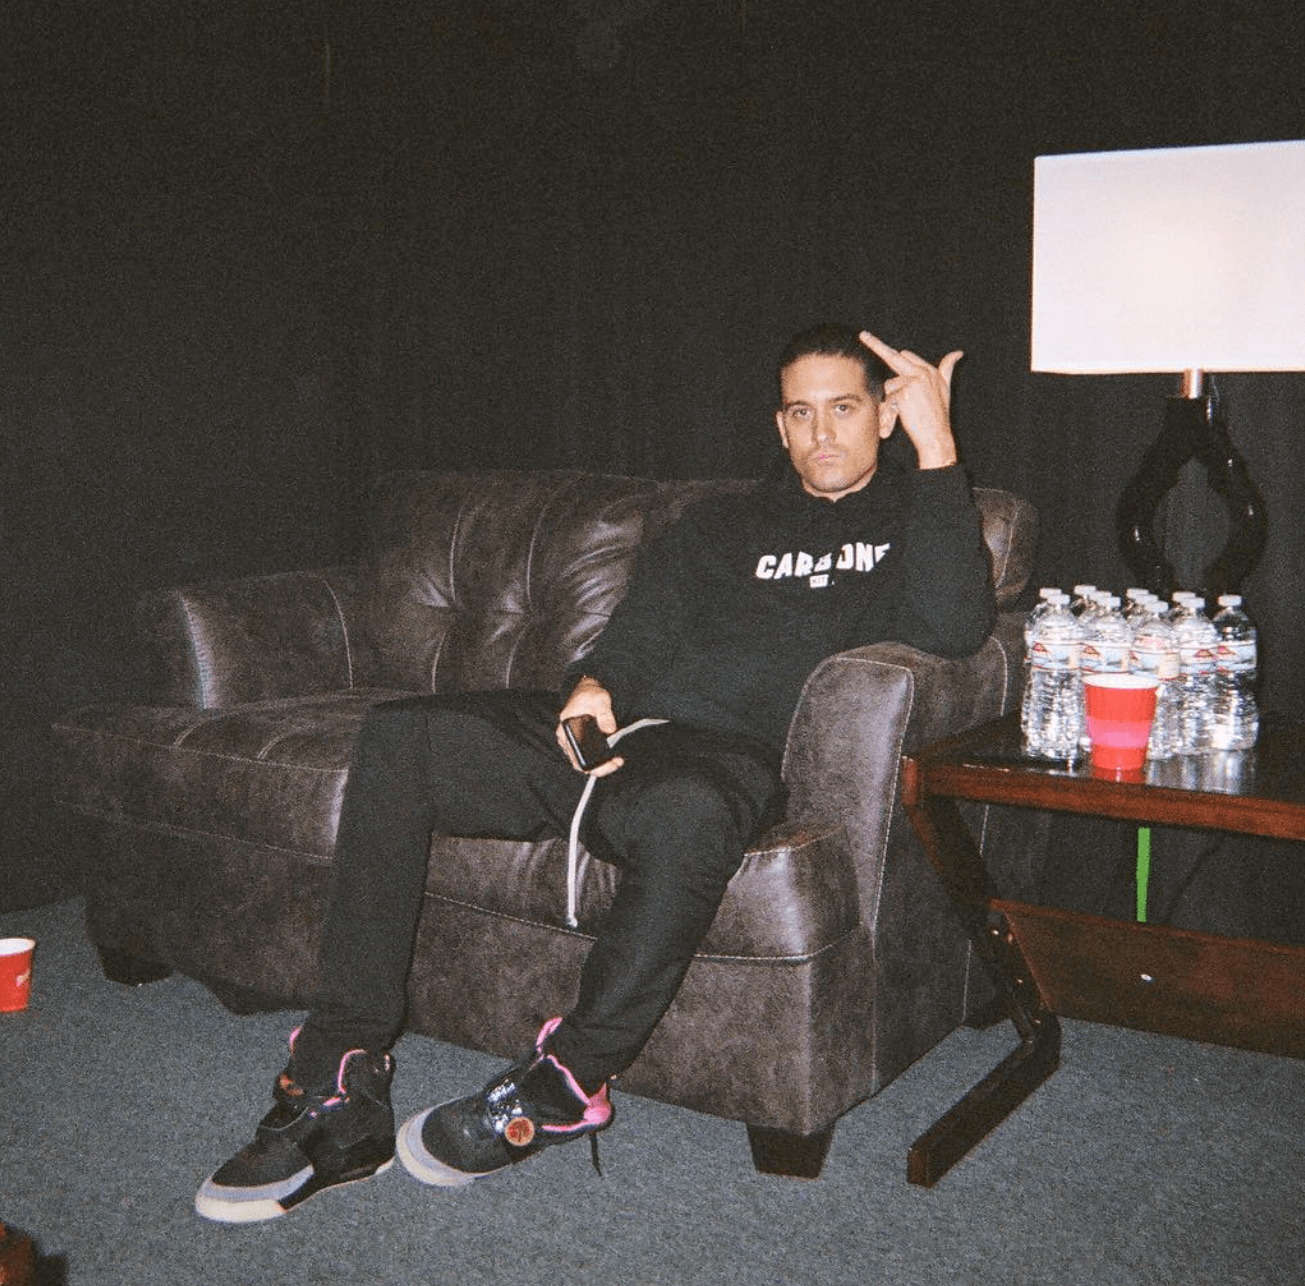 g-eazy-nike-air-yeezy-1-e1521139267662.png